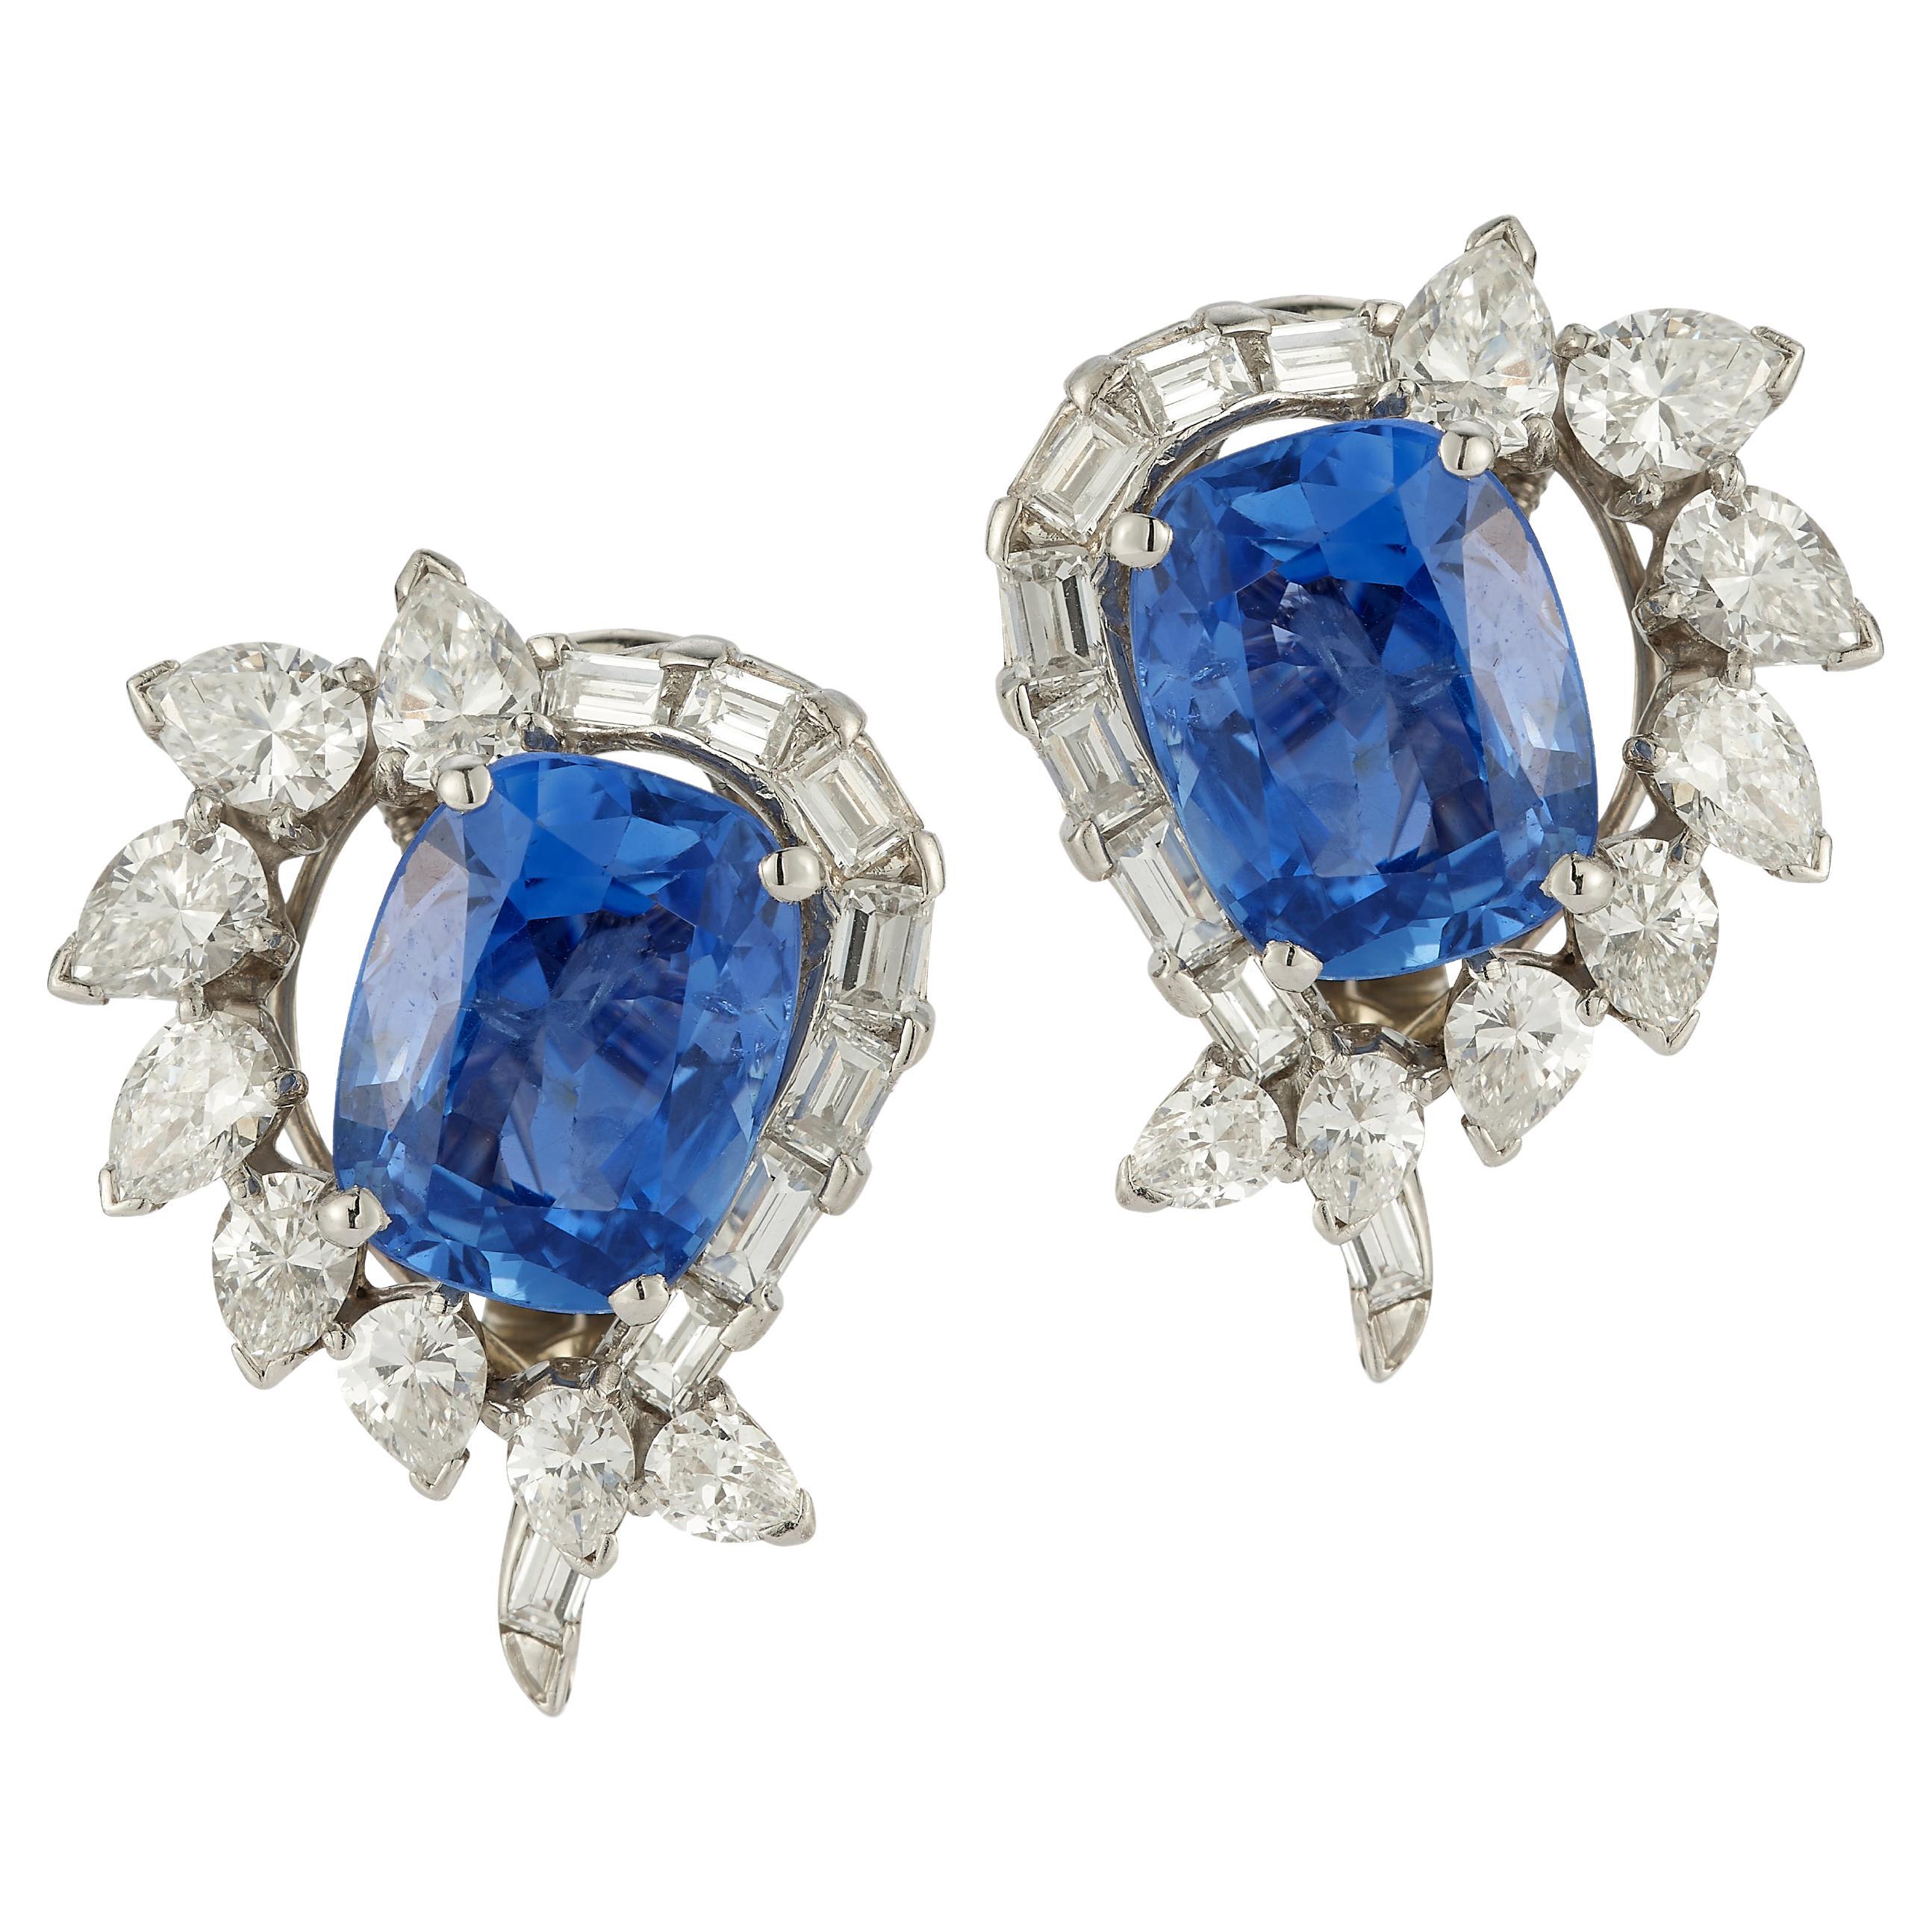 Oscar Heyman Brothers Certified Natural Sapphire and Diamond Earrings 